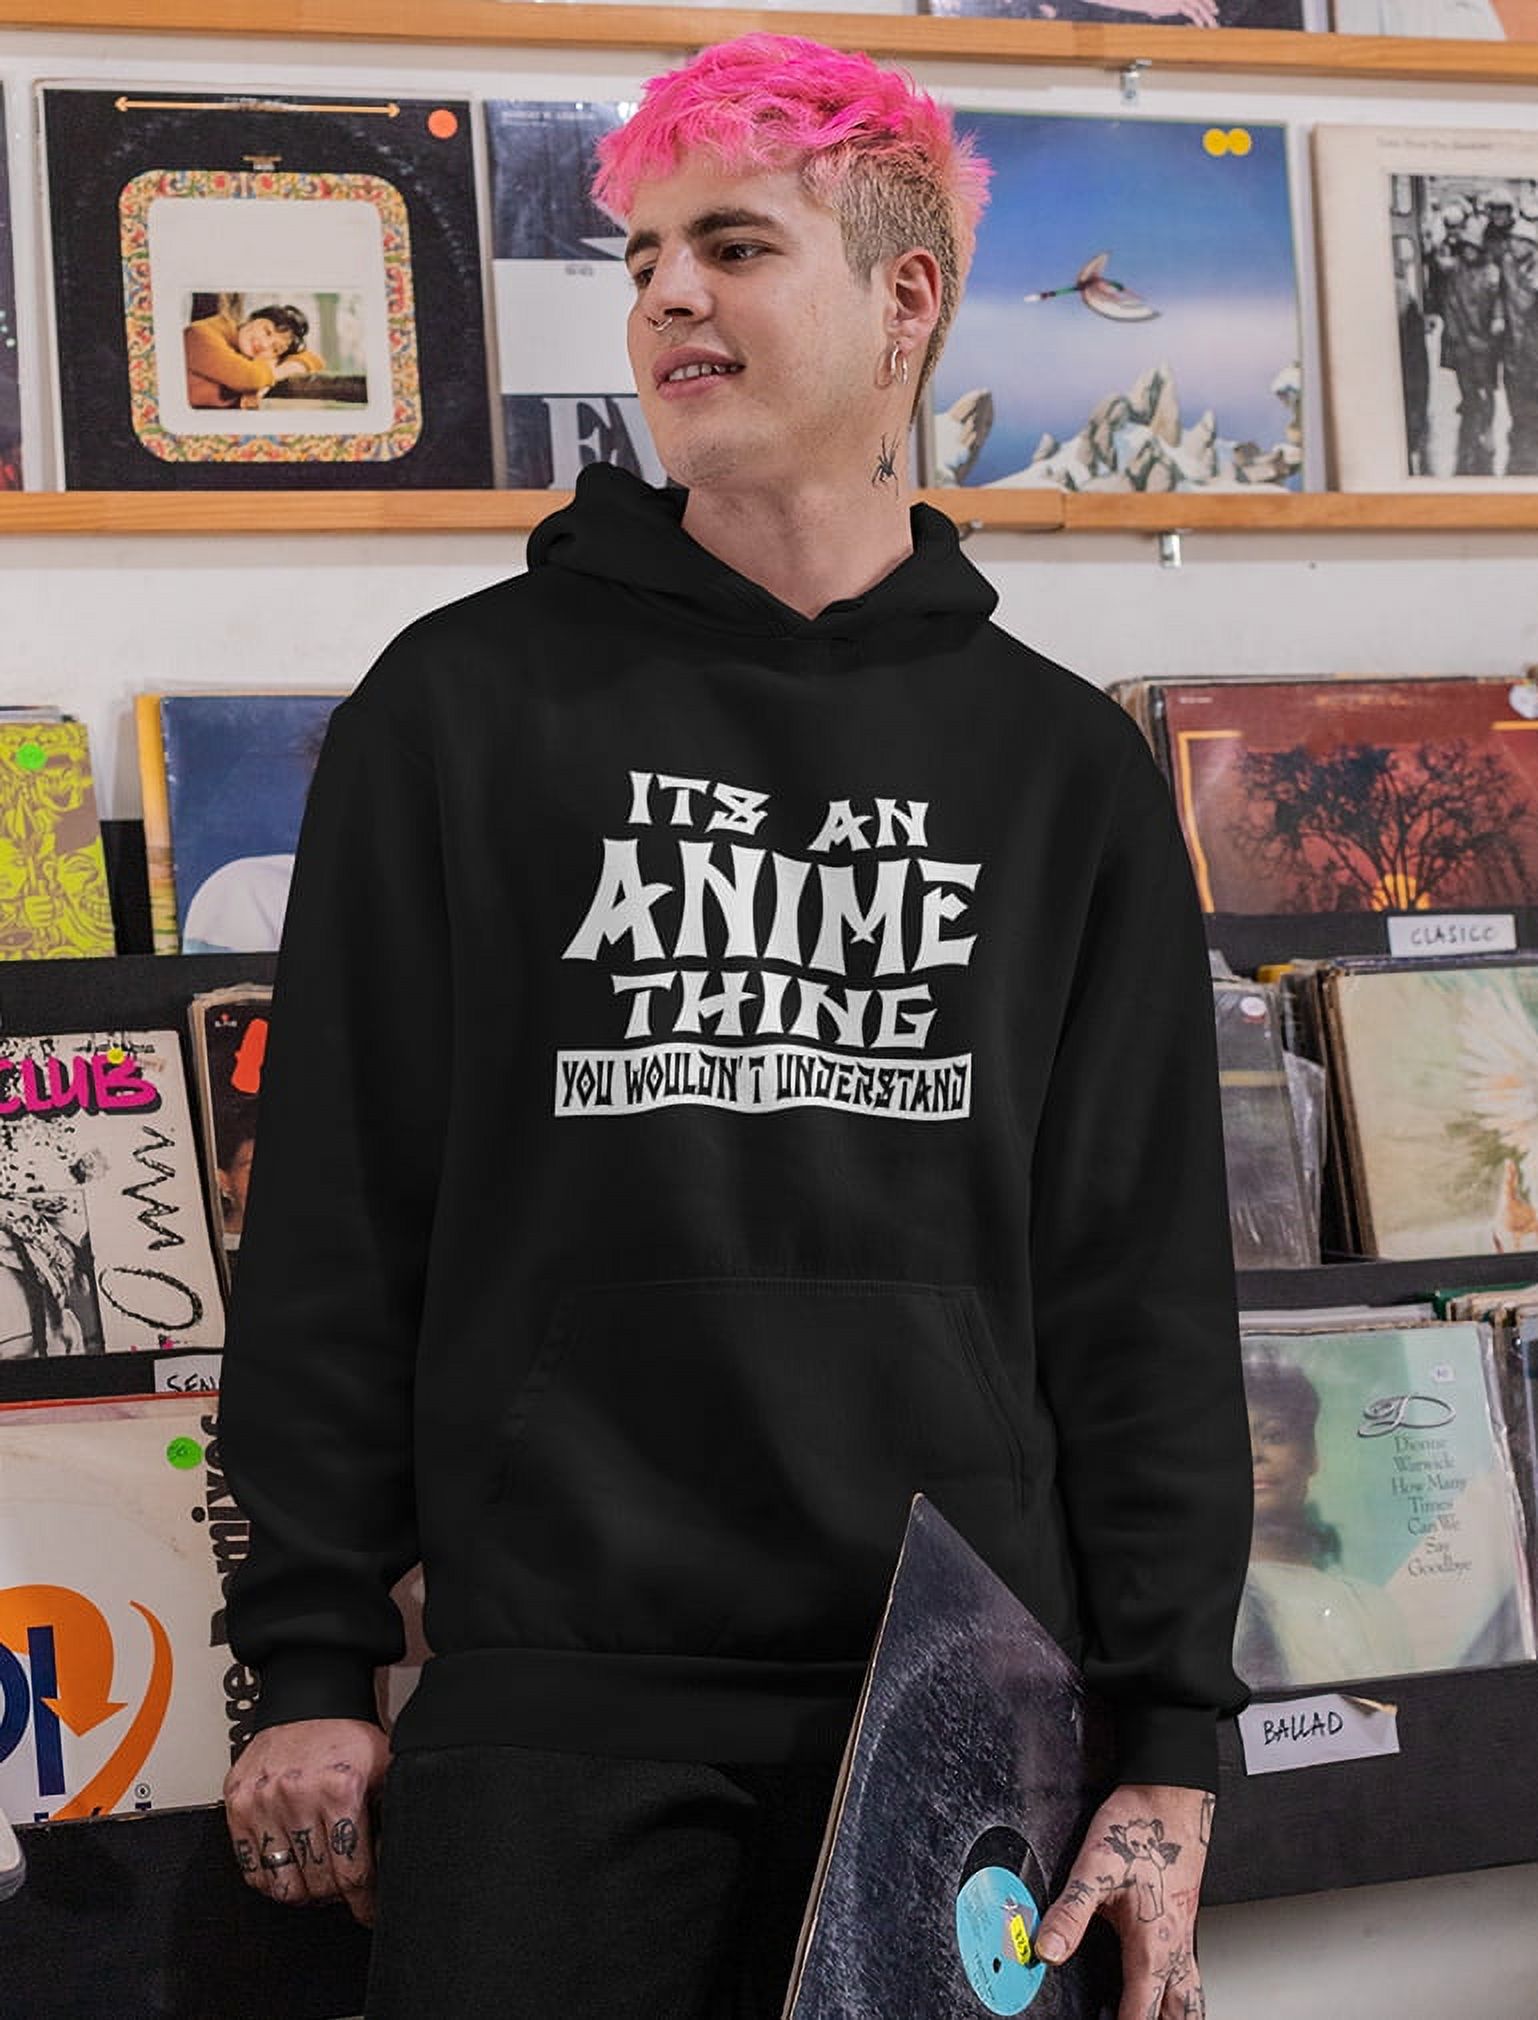 Tstars Men's Anime Lover Graphic Hoodie - It's an Anime Thing You Wouldn't Understand Design - Ideal for Anime Enthusiasts - image 2 of 8